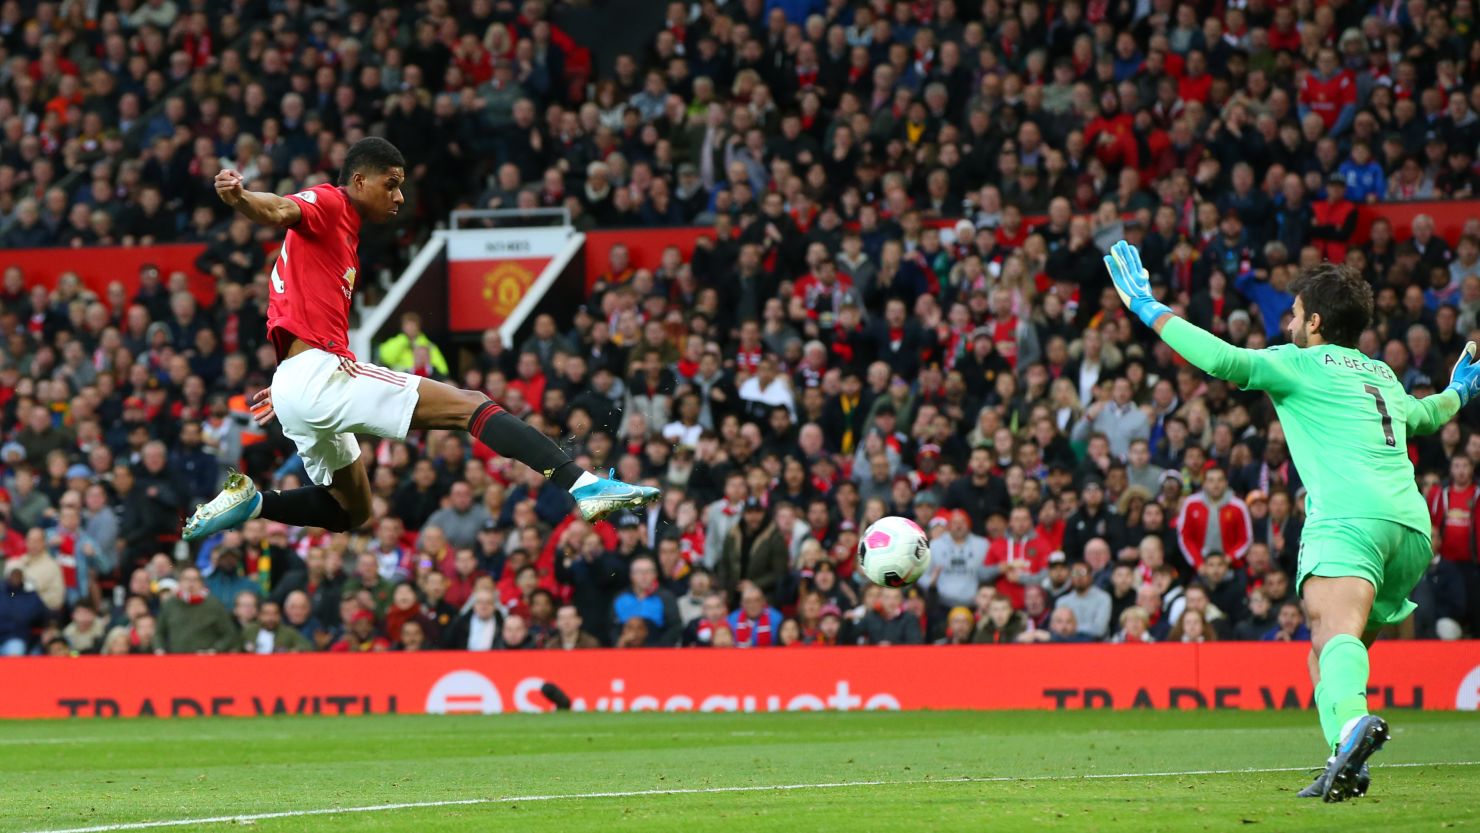 Marcus Rashford of Manchester United scores during the Premier League clash between United and Liverpool at Old Trafford on Sunday.